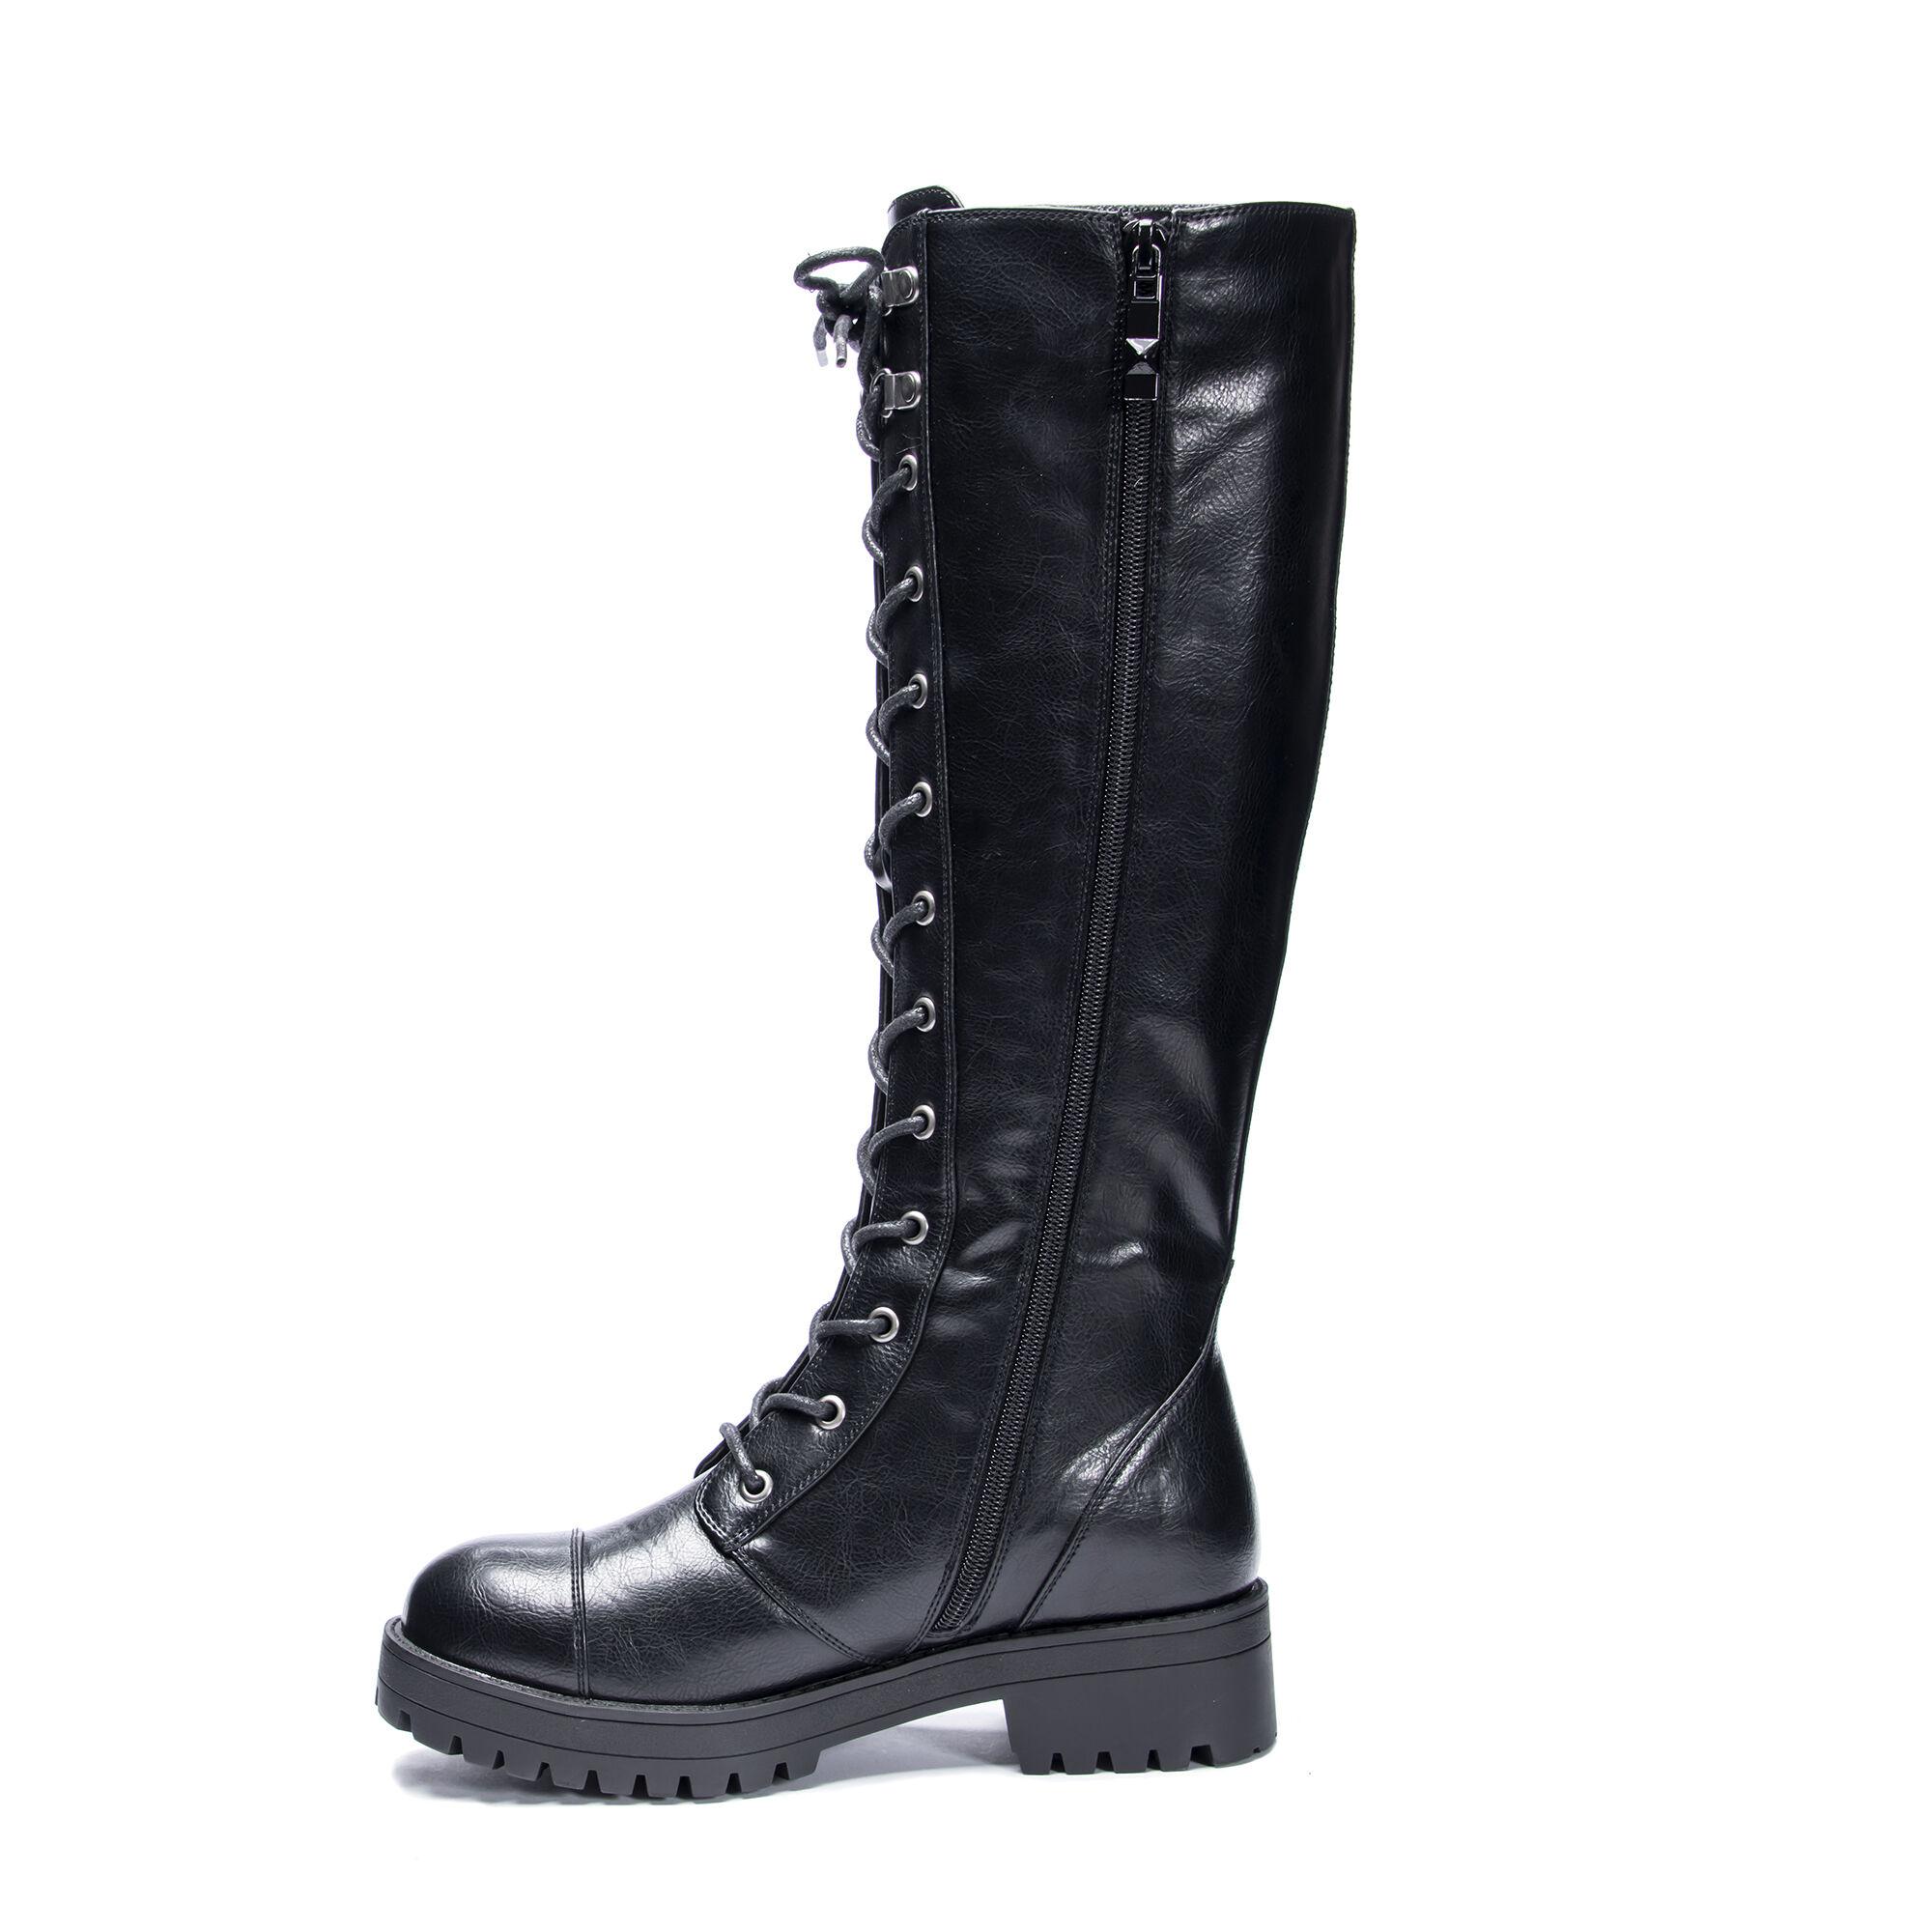 Dirty Laundry Vandal Boot in Black - Lyst